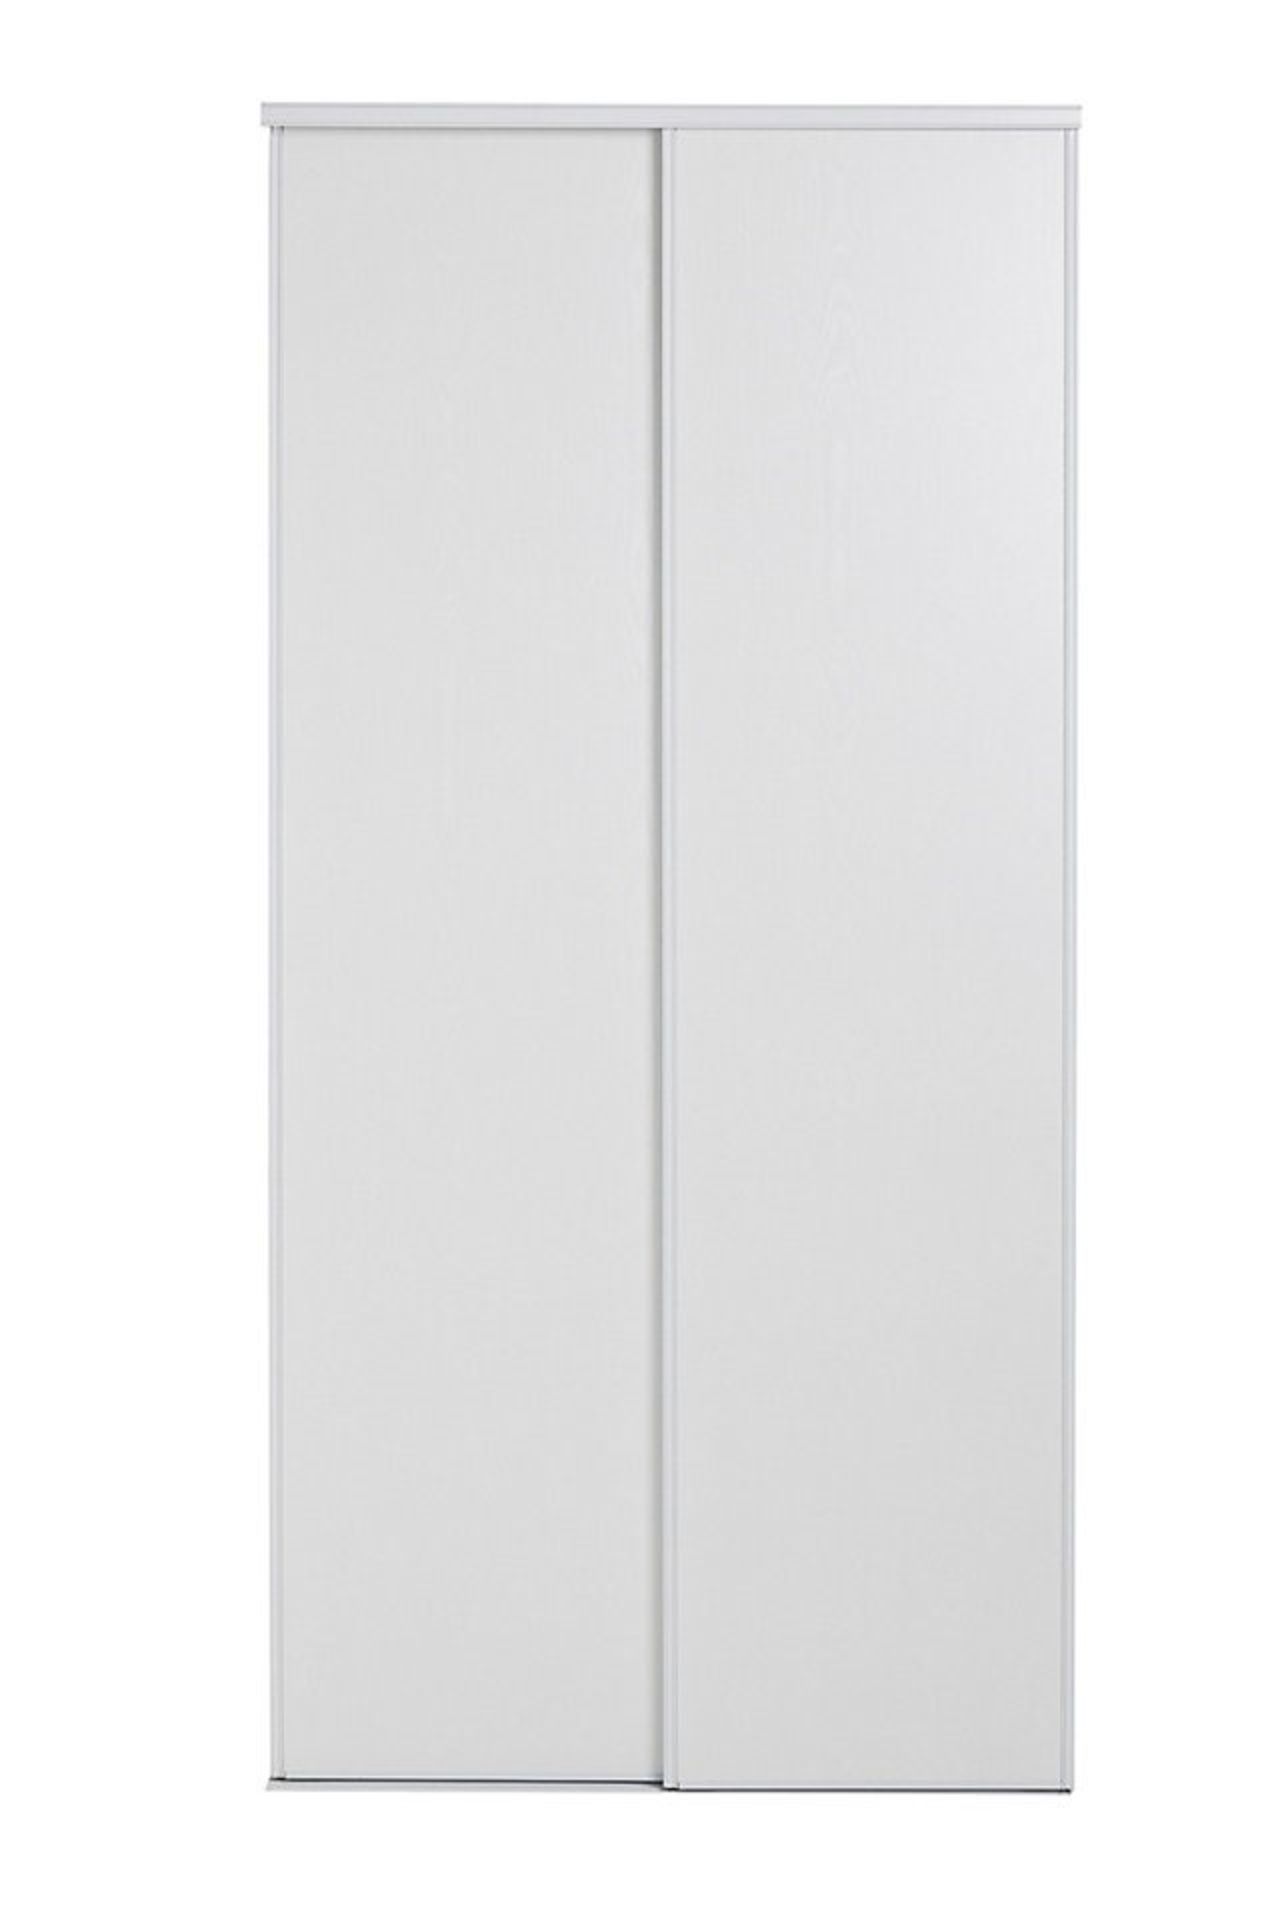 1 x BLIZZ Pack of 2 Sliding Wardrobe Doors In White Decorative Panel With White Lacquered Steel Trac